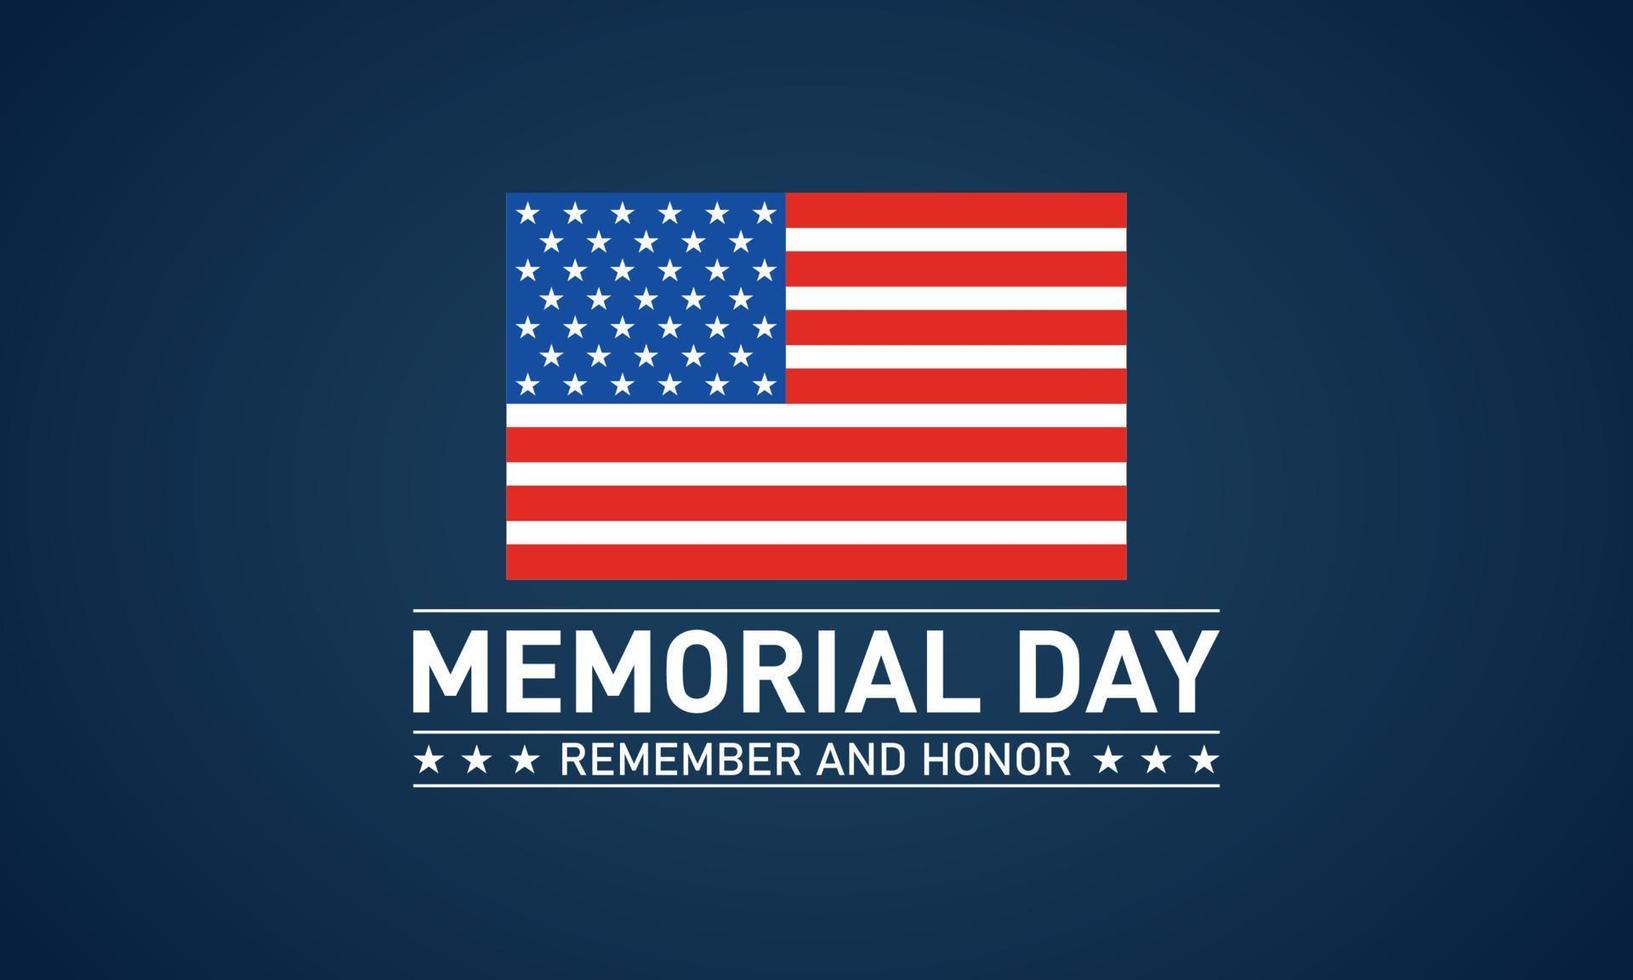 Memorial day - remember and honor. Usa memorial day celebration. Vector template for banner, greeting card, poster with background. Vector illustration.